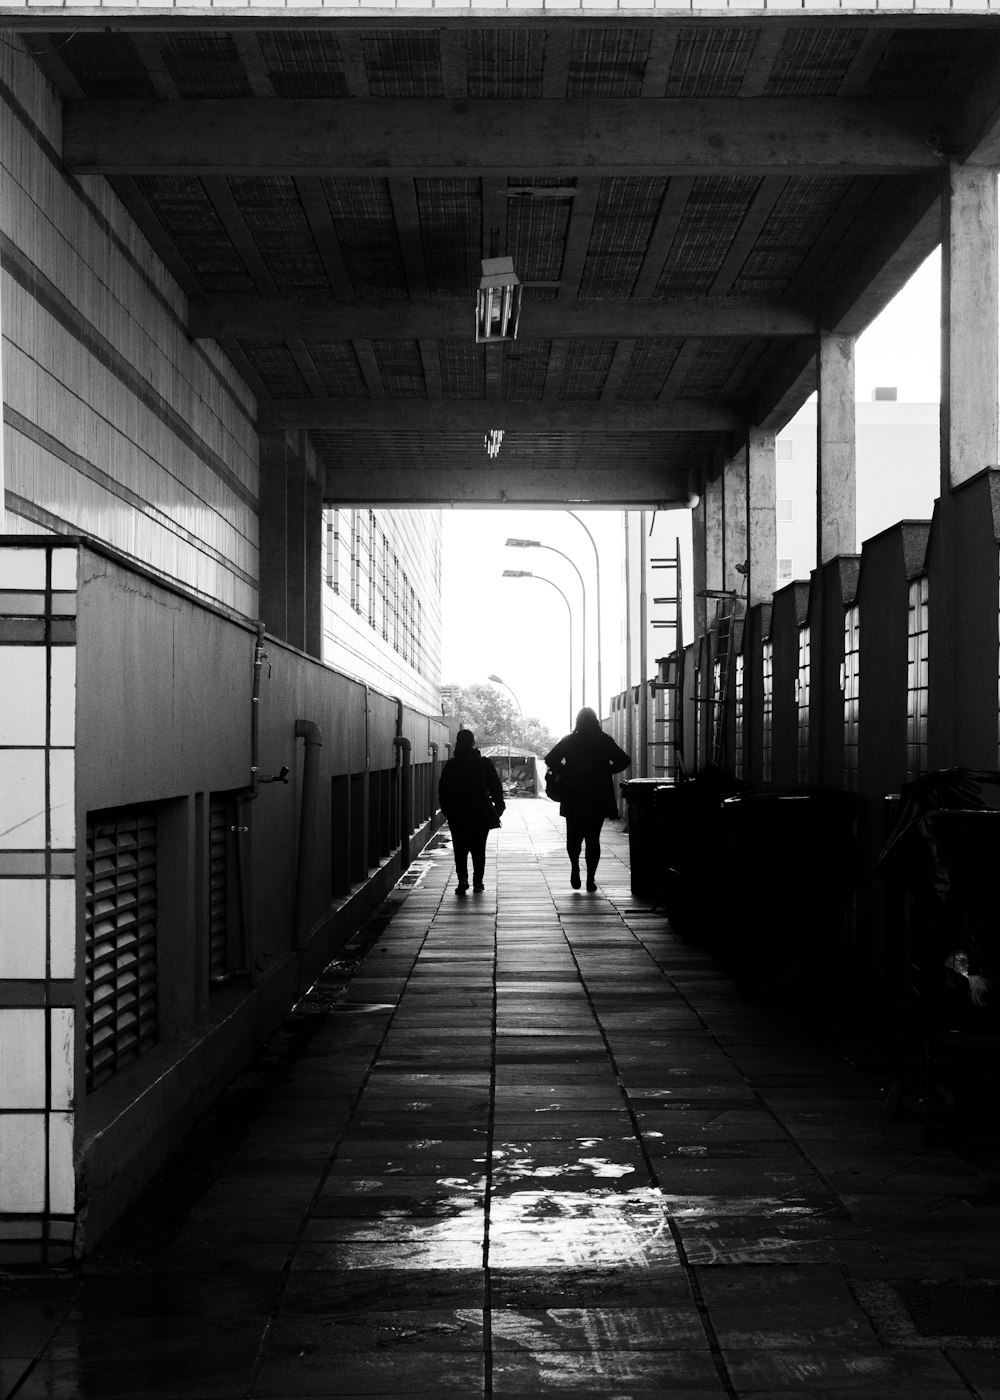 grayscale photo of people walking on train station